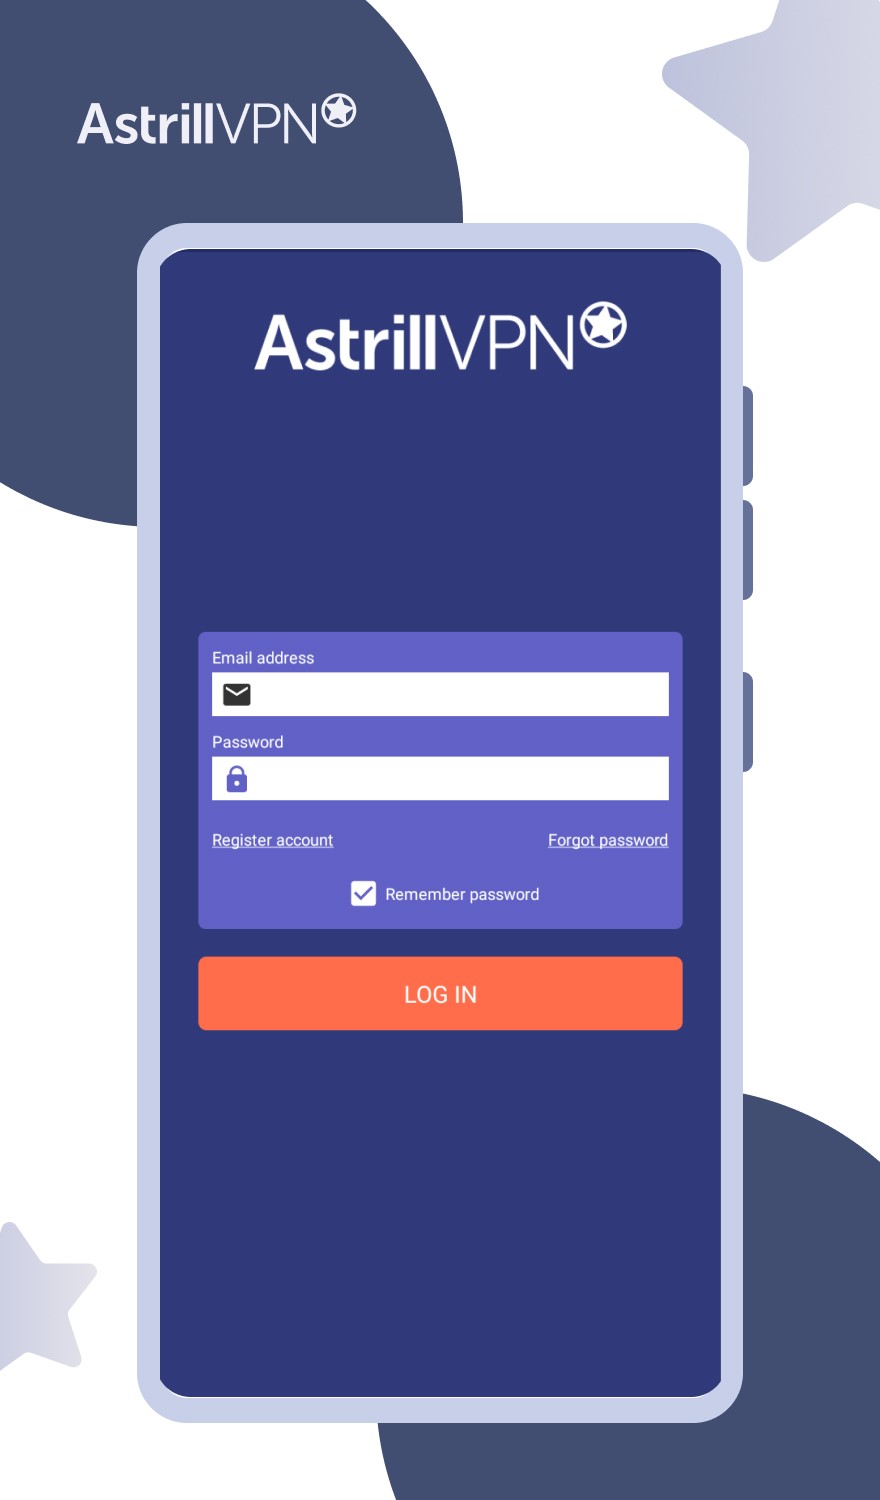 open the AstrillVPN and log in